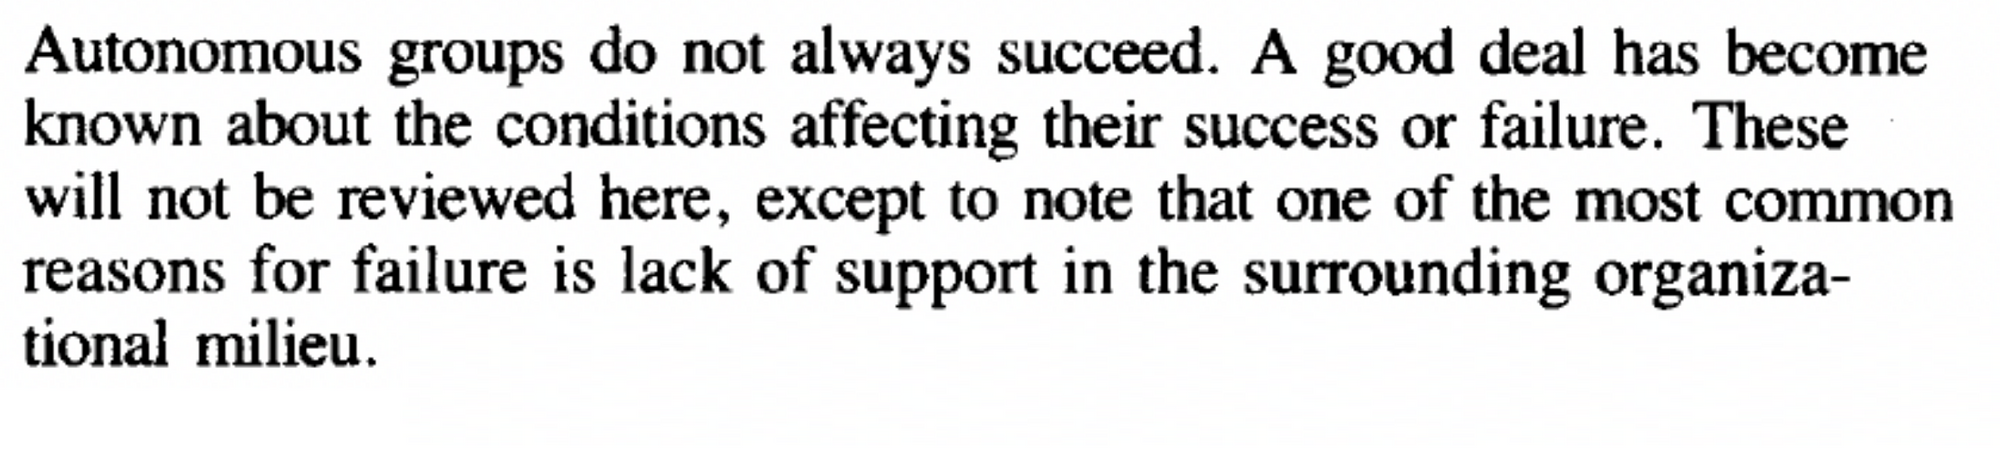 An excerpt of the paper on how autonomous groups do not always succeed